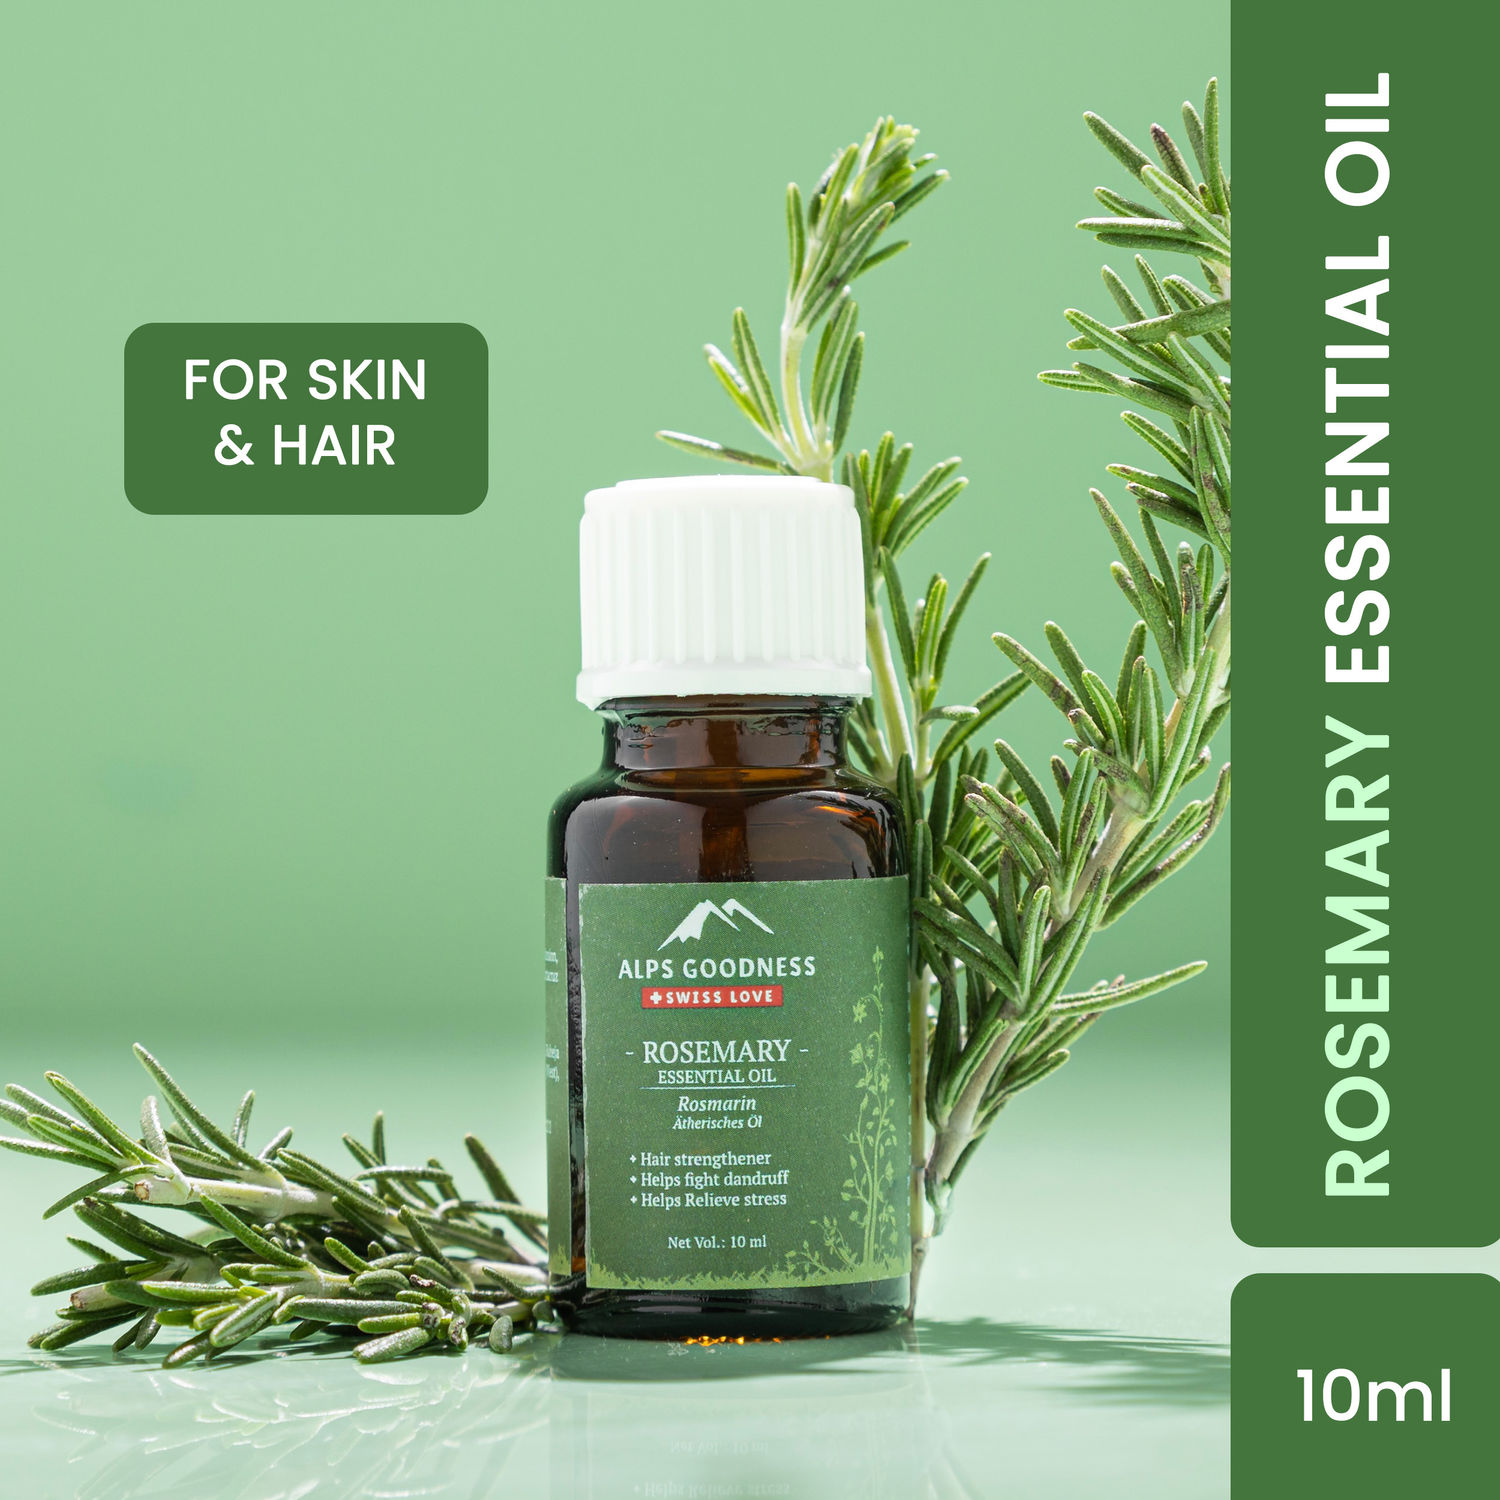 Alps Goodness Pure Essential Oil - Rosemary (10ml)